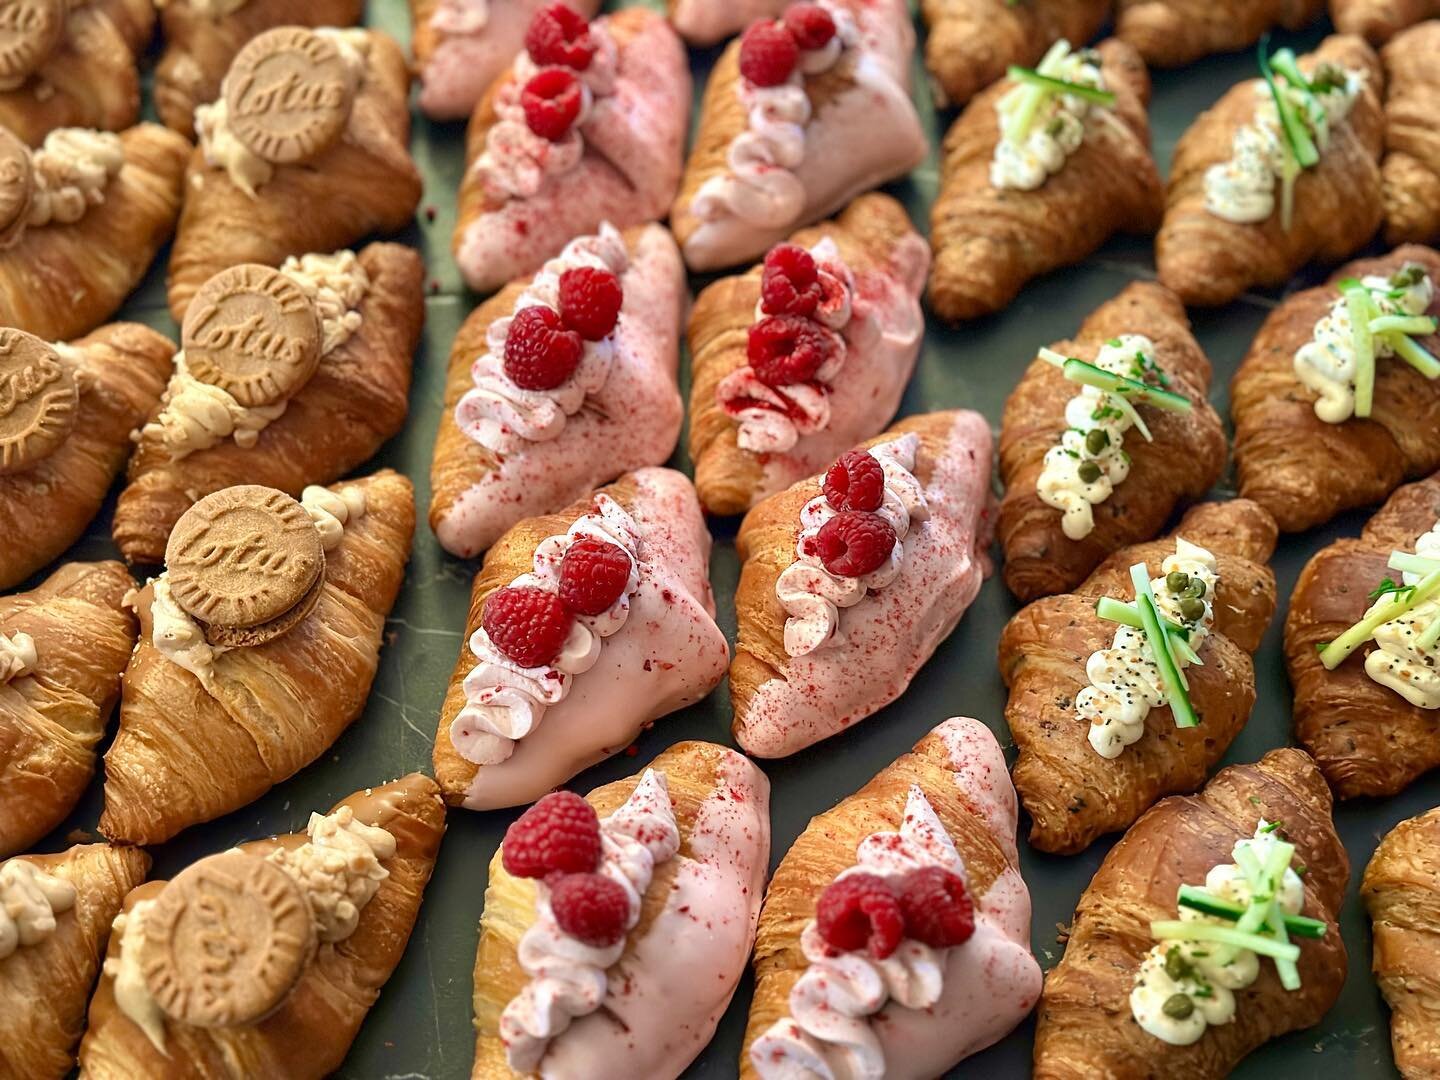 Planning on staying in bed on this glorious Saturday? Don&rsquo;t! This fake St Louis spring won&rsquo;t last long. Enjoy the city breeze&hellip;. On your way to get these stuffed croissants. Today we have, Cookie Butter, Raspberry Cr&eacute;m&eacute